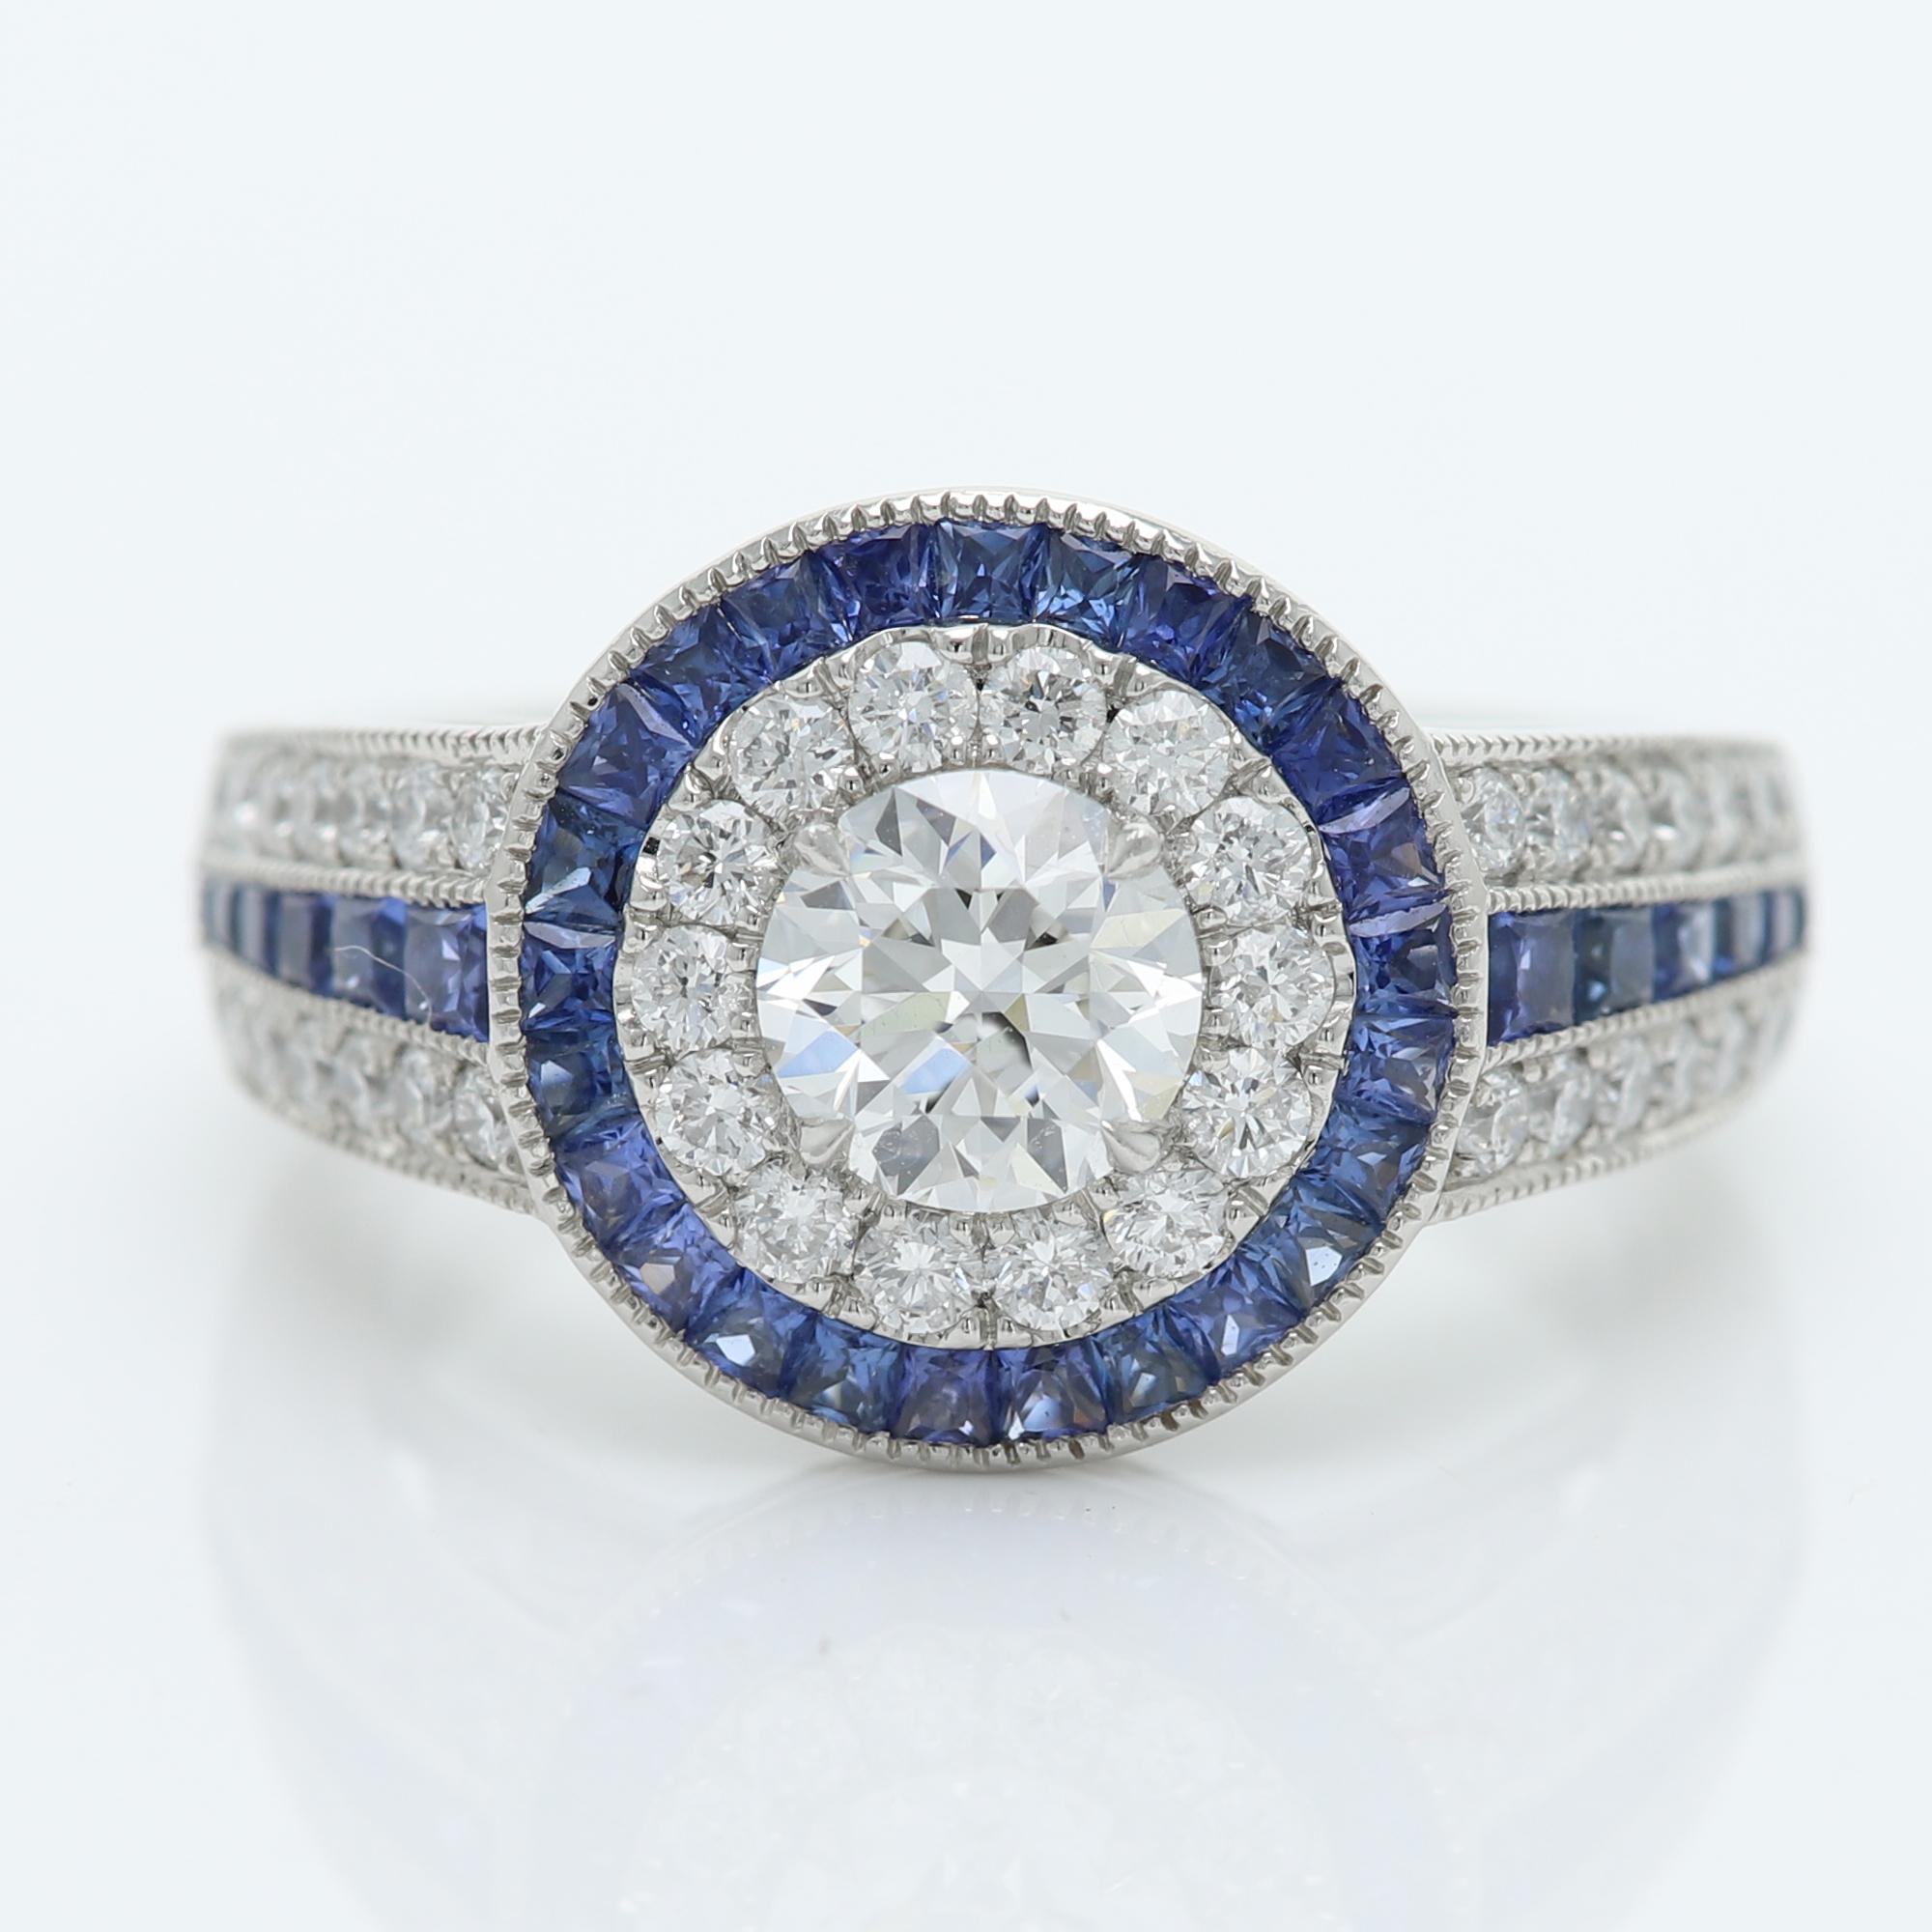 Art Deco Style Bold Ring
Center is 0.73 carat Diamond surrounded with Blue Sapphire, 
Center Diamond is a Brilliant D-VS2 (6.0 mm)
All stones are Natural
Platinum 13 grams
set in a cup setting
Small Diamonds 1.70 carat
Blue Sapphire 1.19